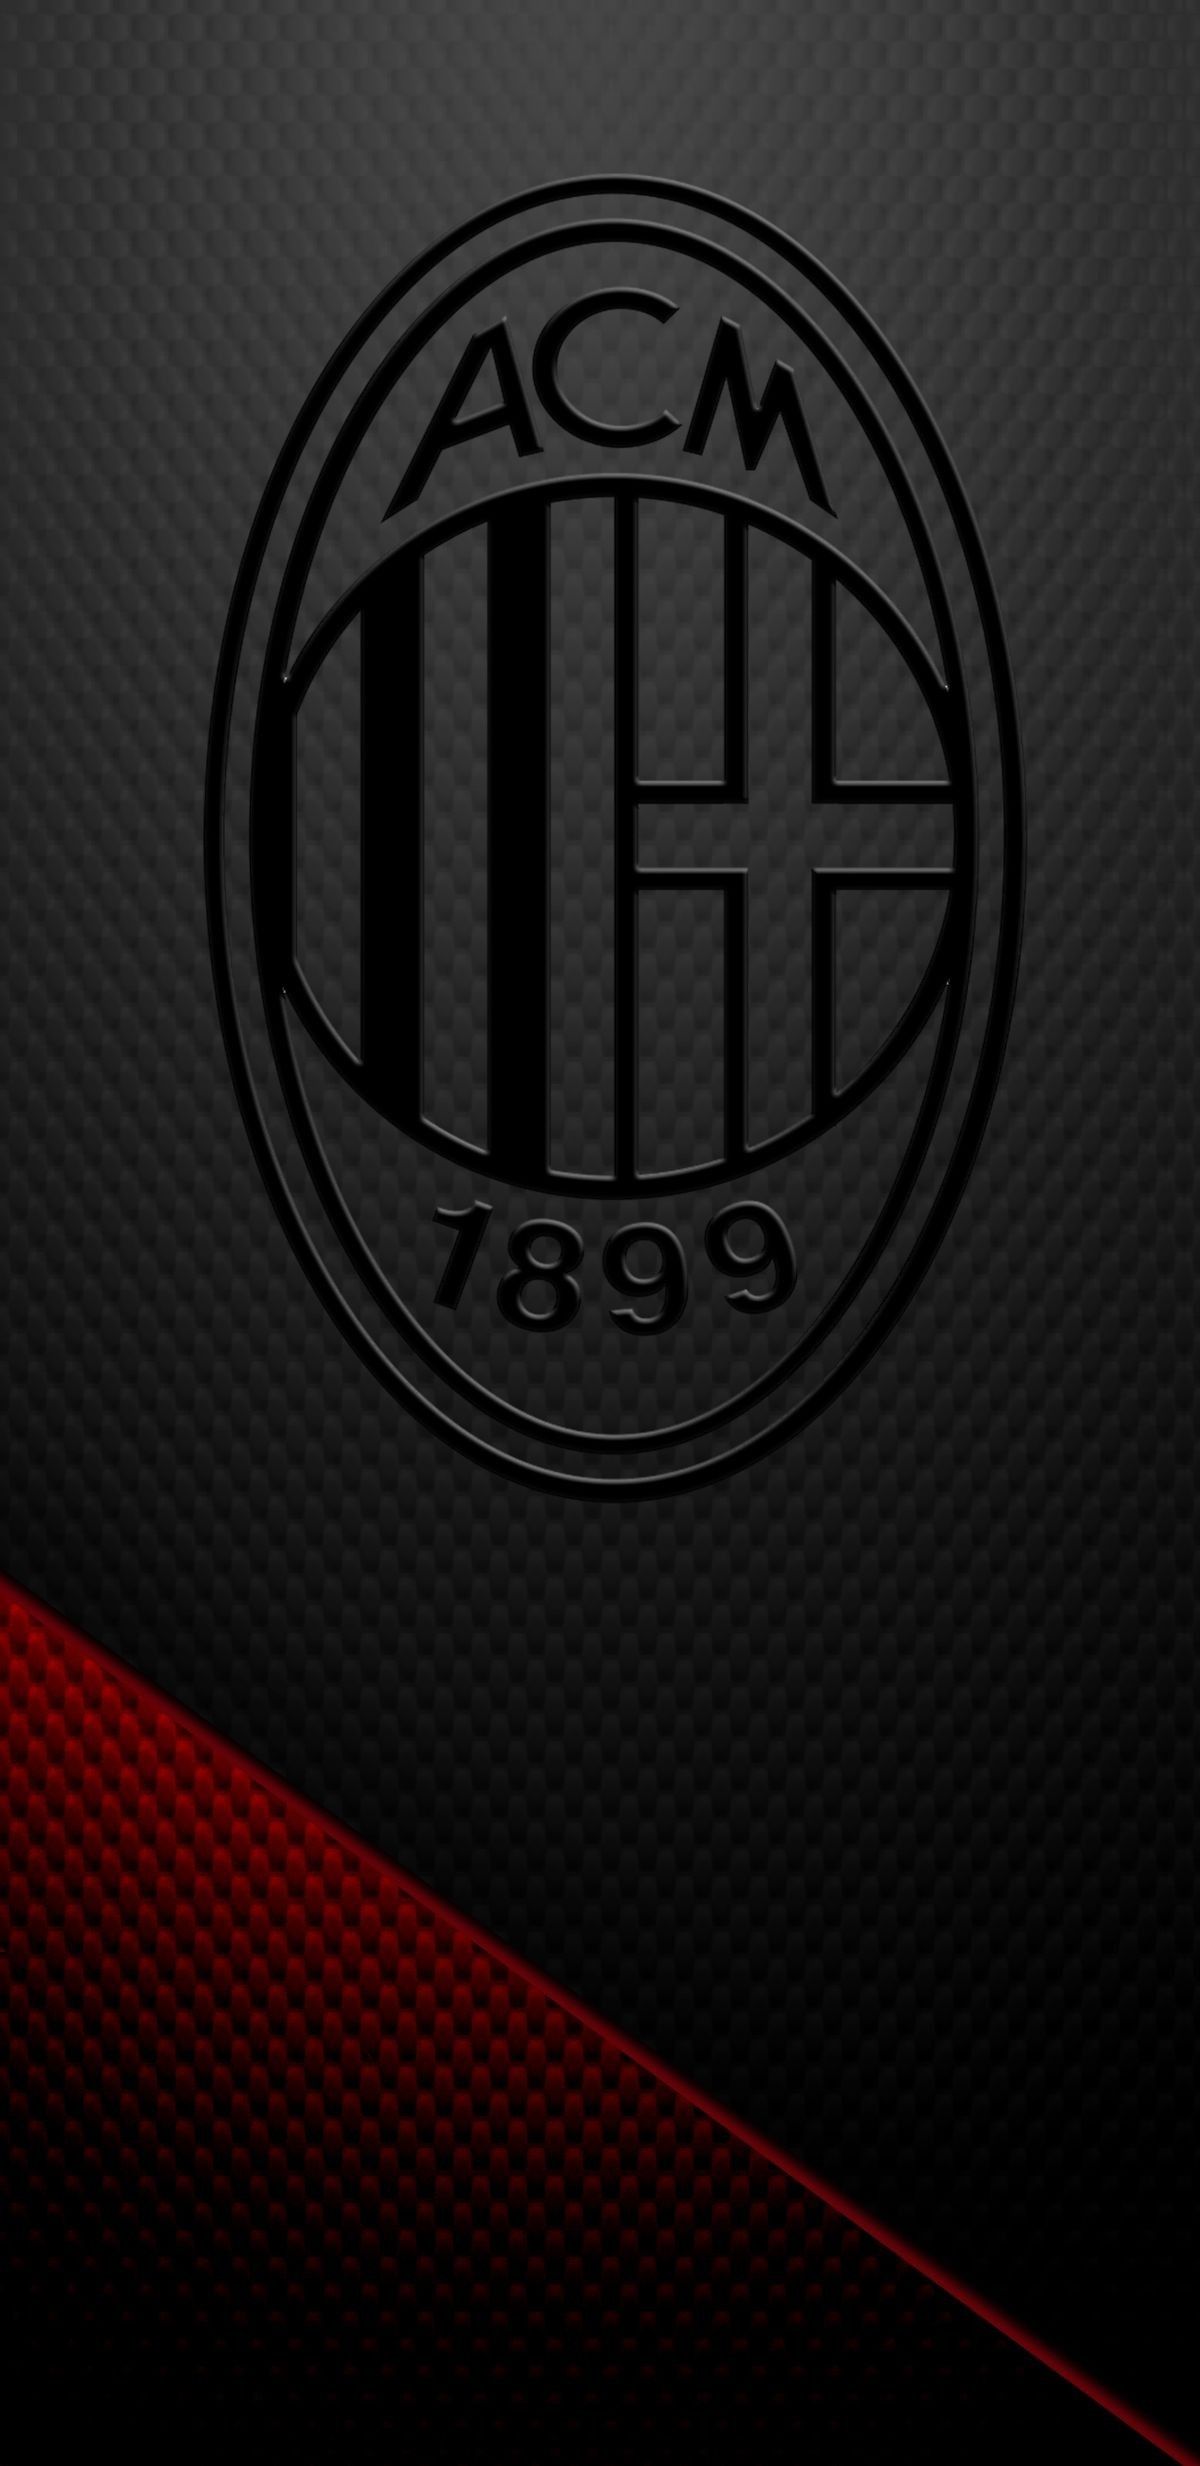 Ac milan k android wallpapers